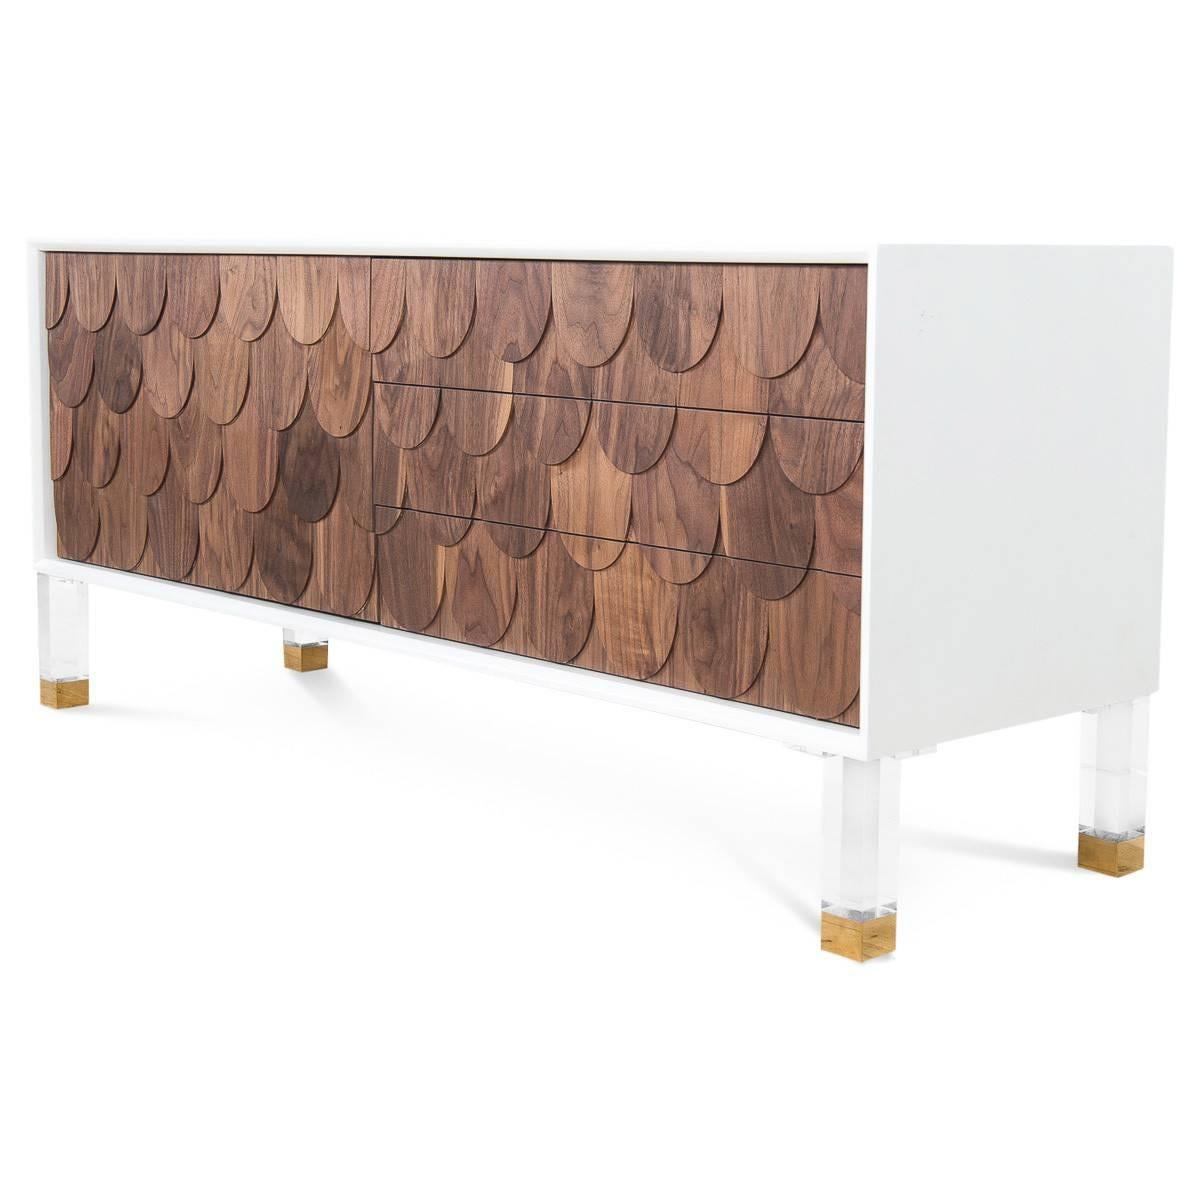 This credenza features a solid North American oiled walnut facade with 7